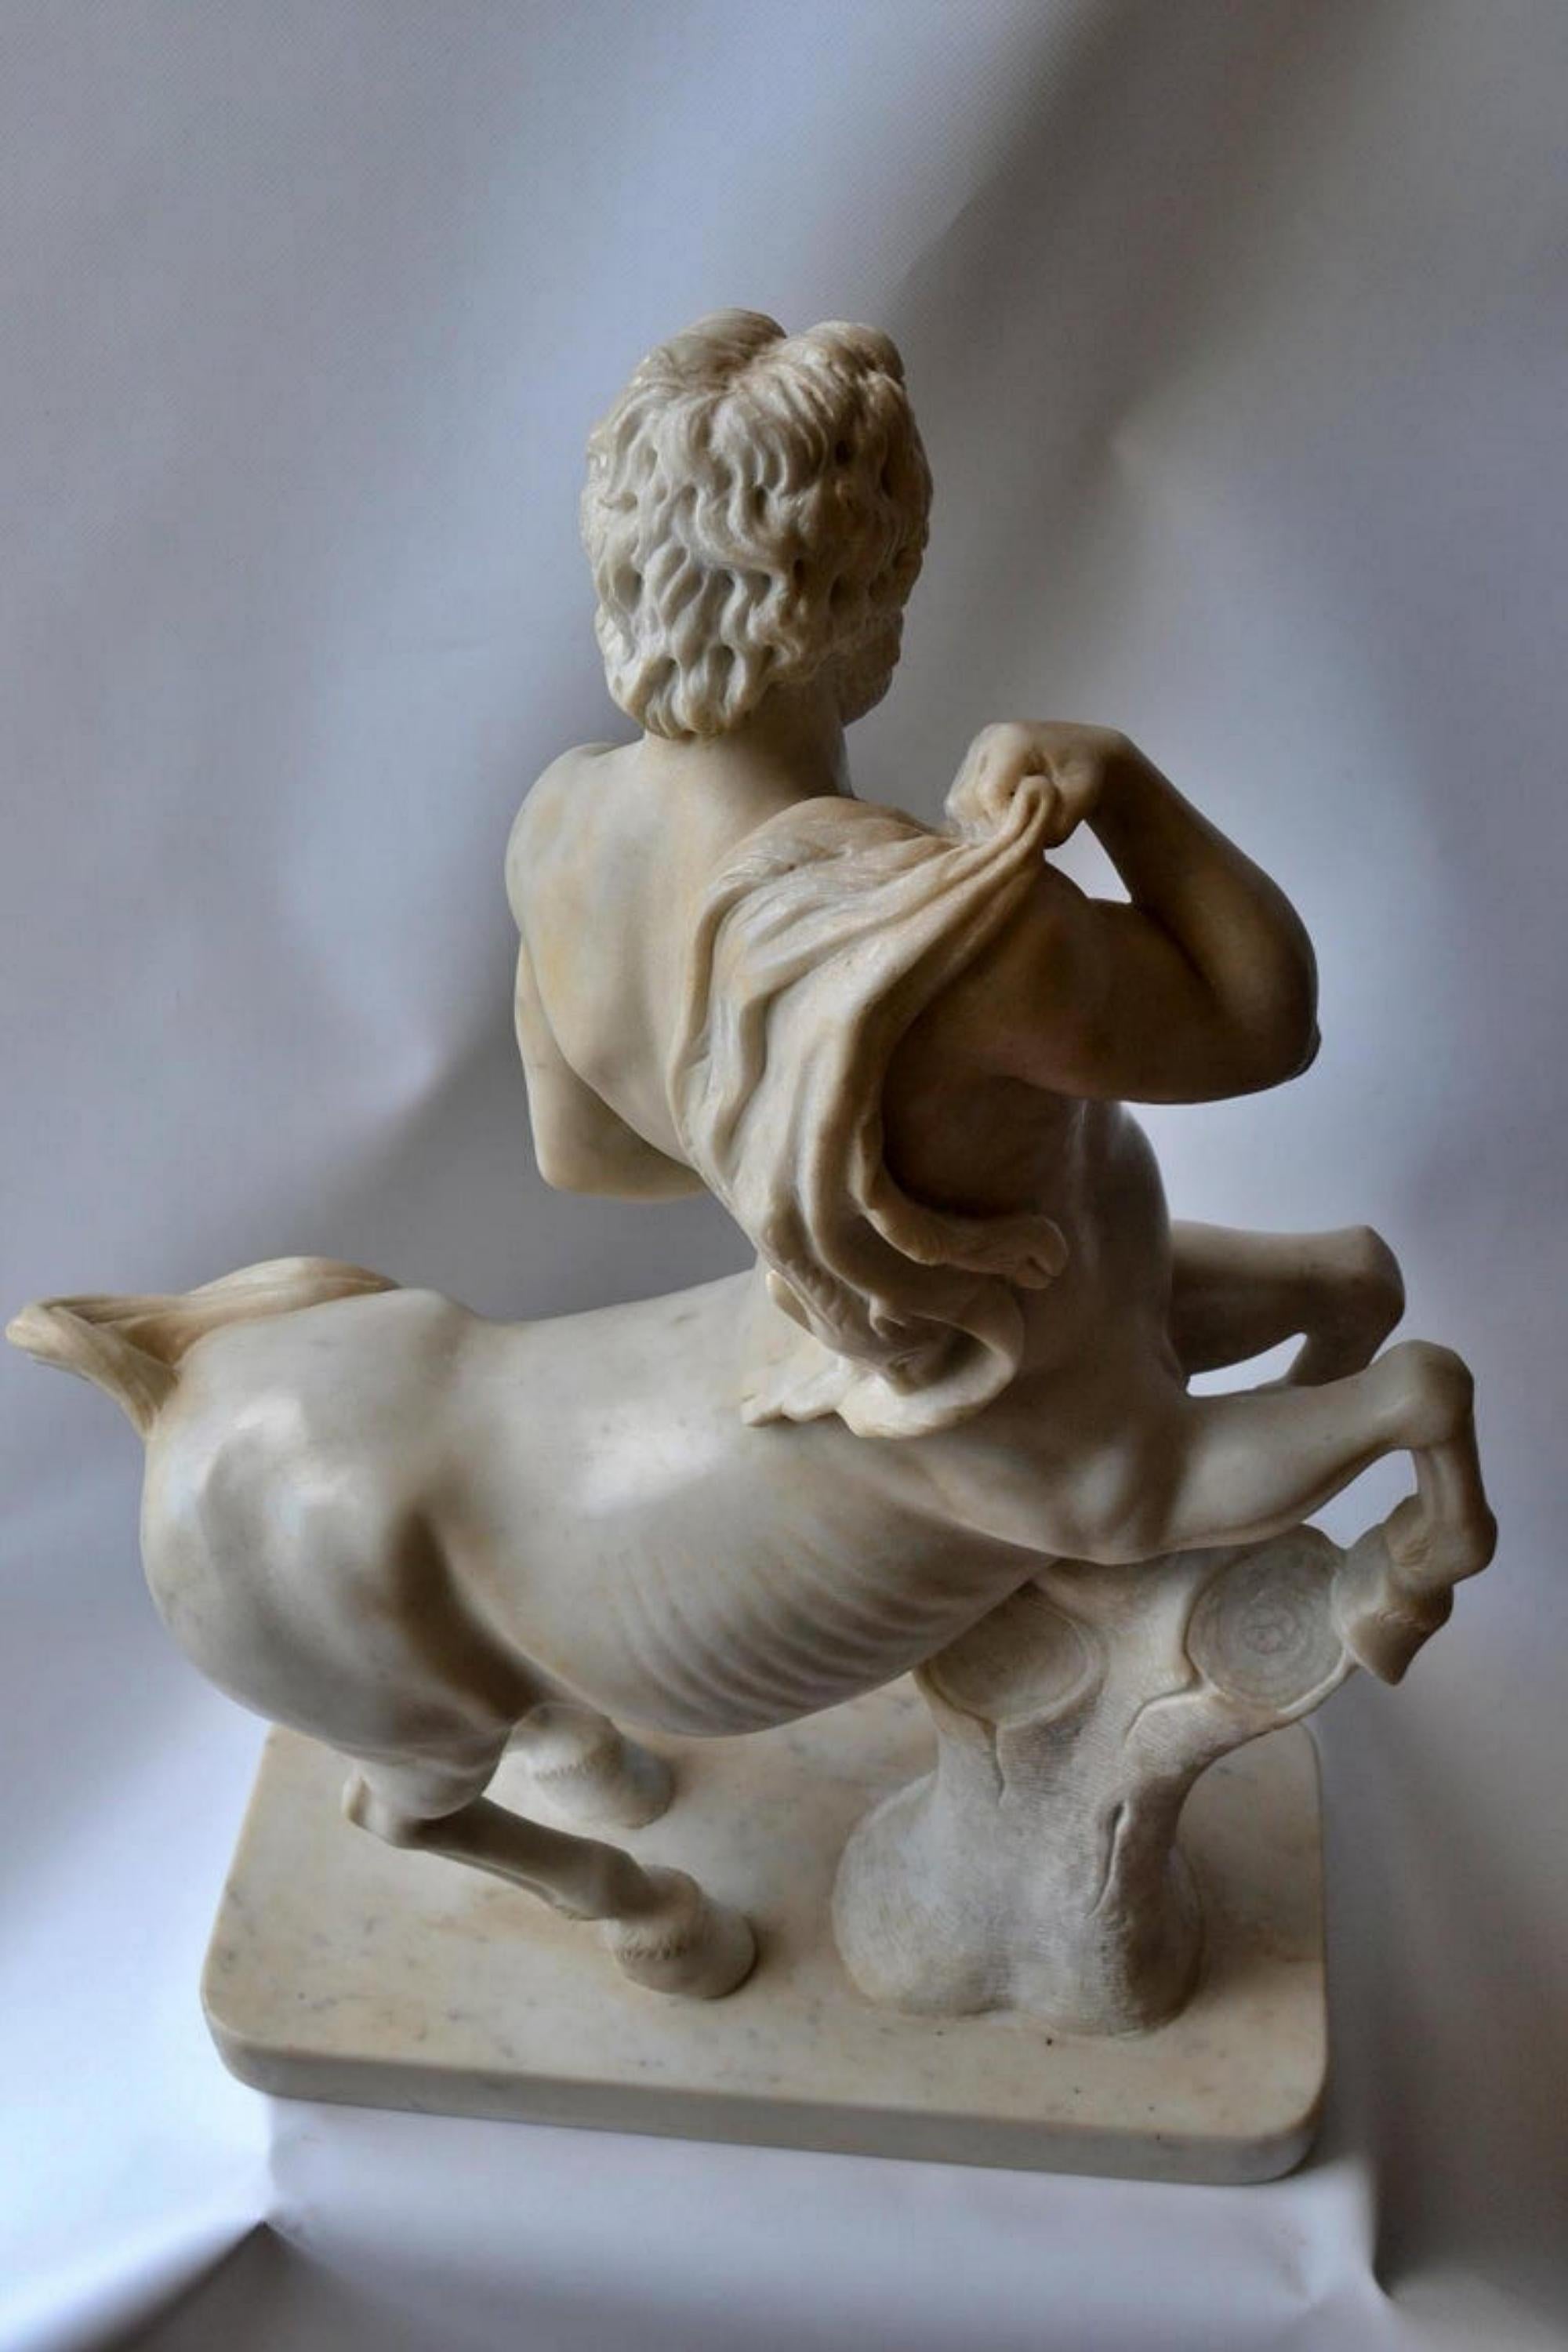 Unique Italian Centaur Sculpture Carved in Carrara Marble Early 20th Century For Sale 3